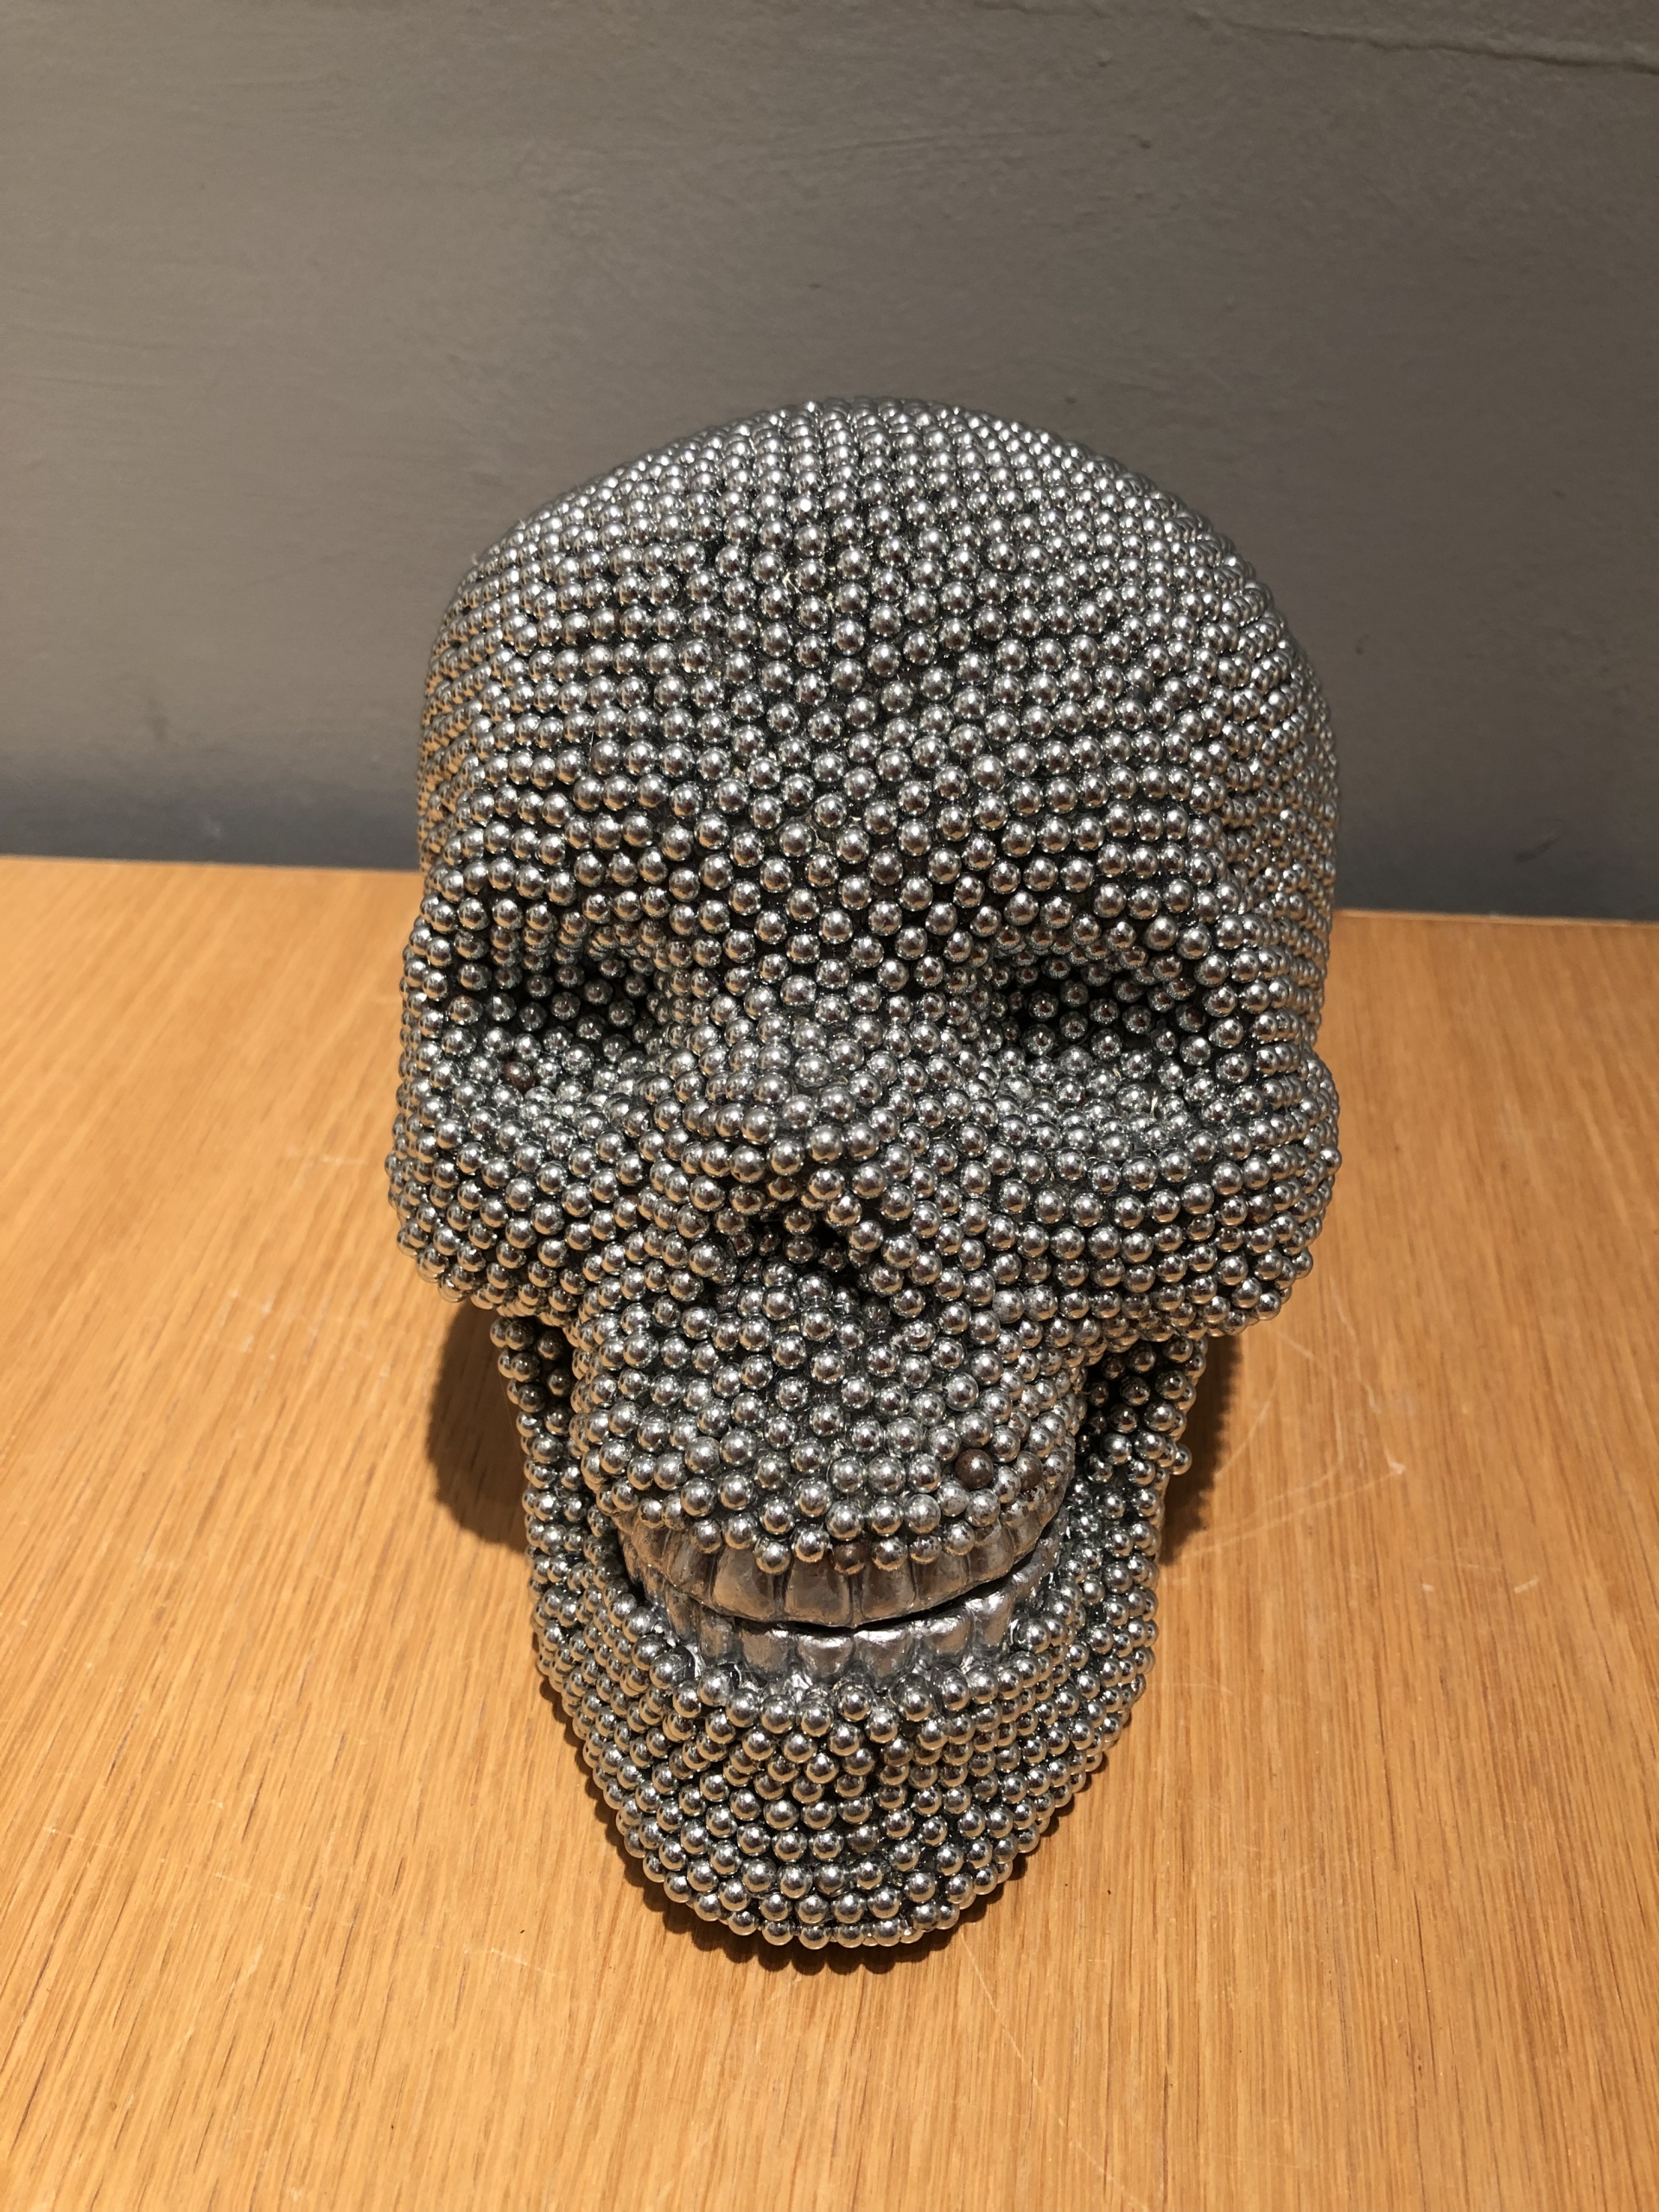 Timmermans, Skull (silver), 2015, air rifle BBs, cast resin, mixed media, 6x6x8in. 5